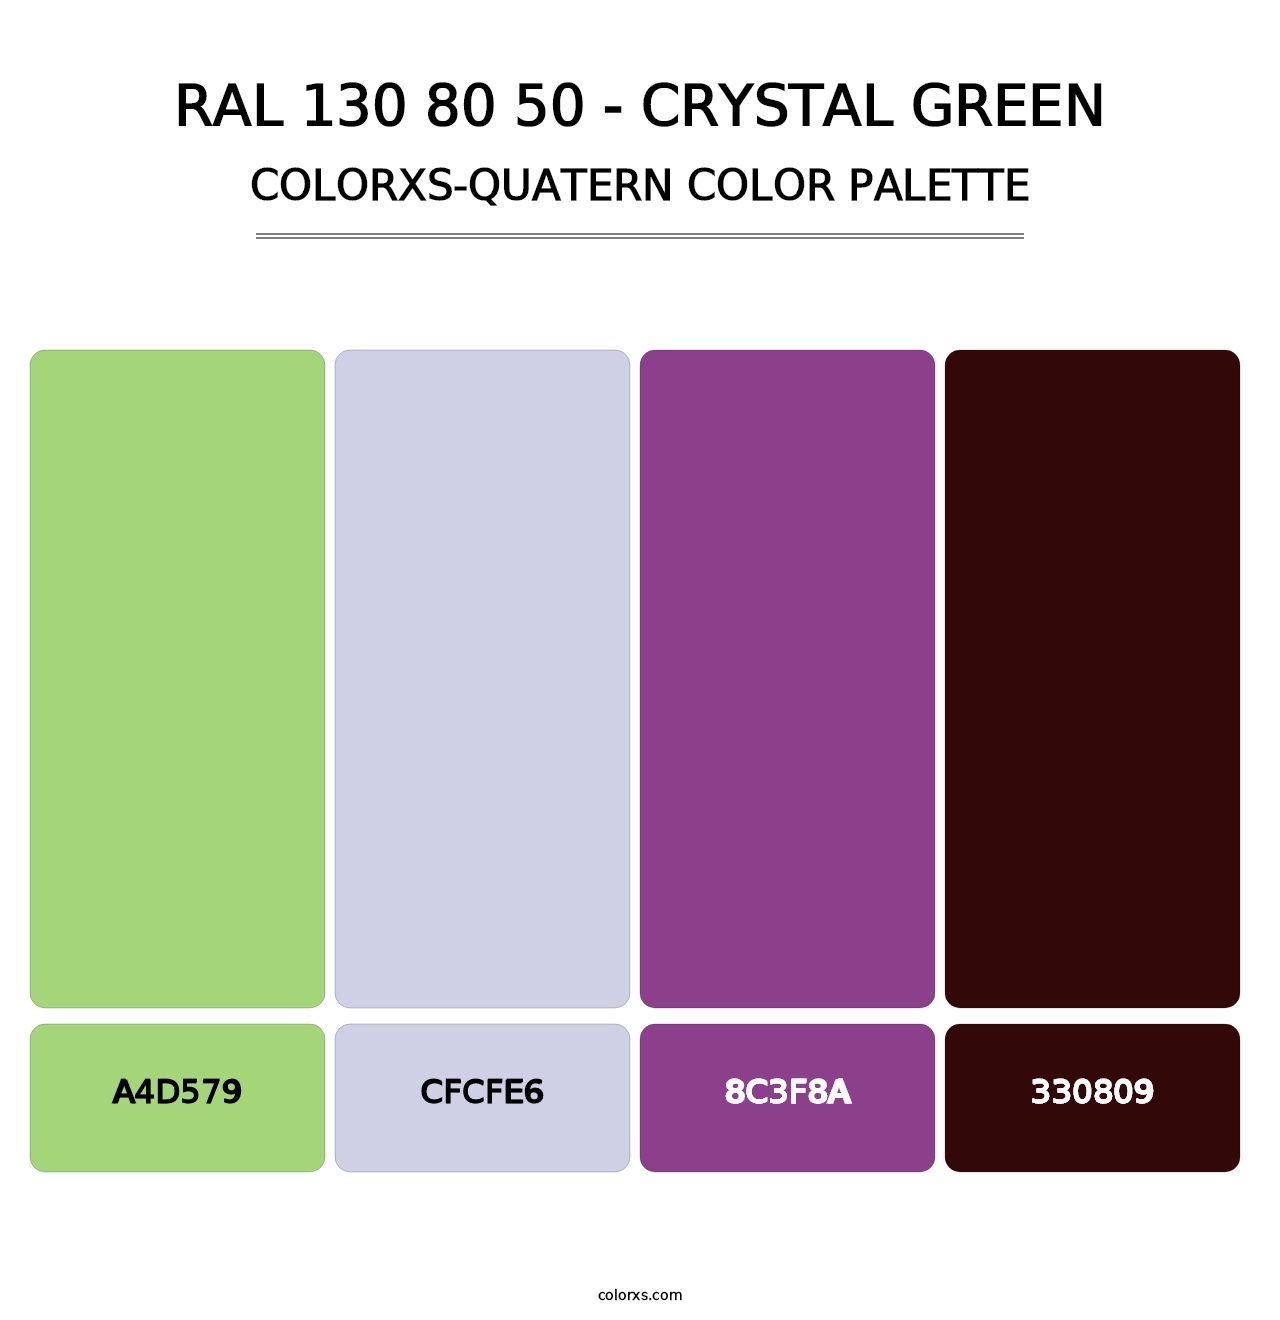 RAL 130 80 50 - Crystal Green - Colorxs Quatern Palette